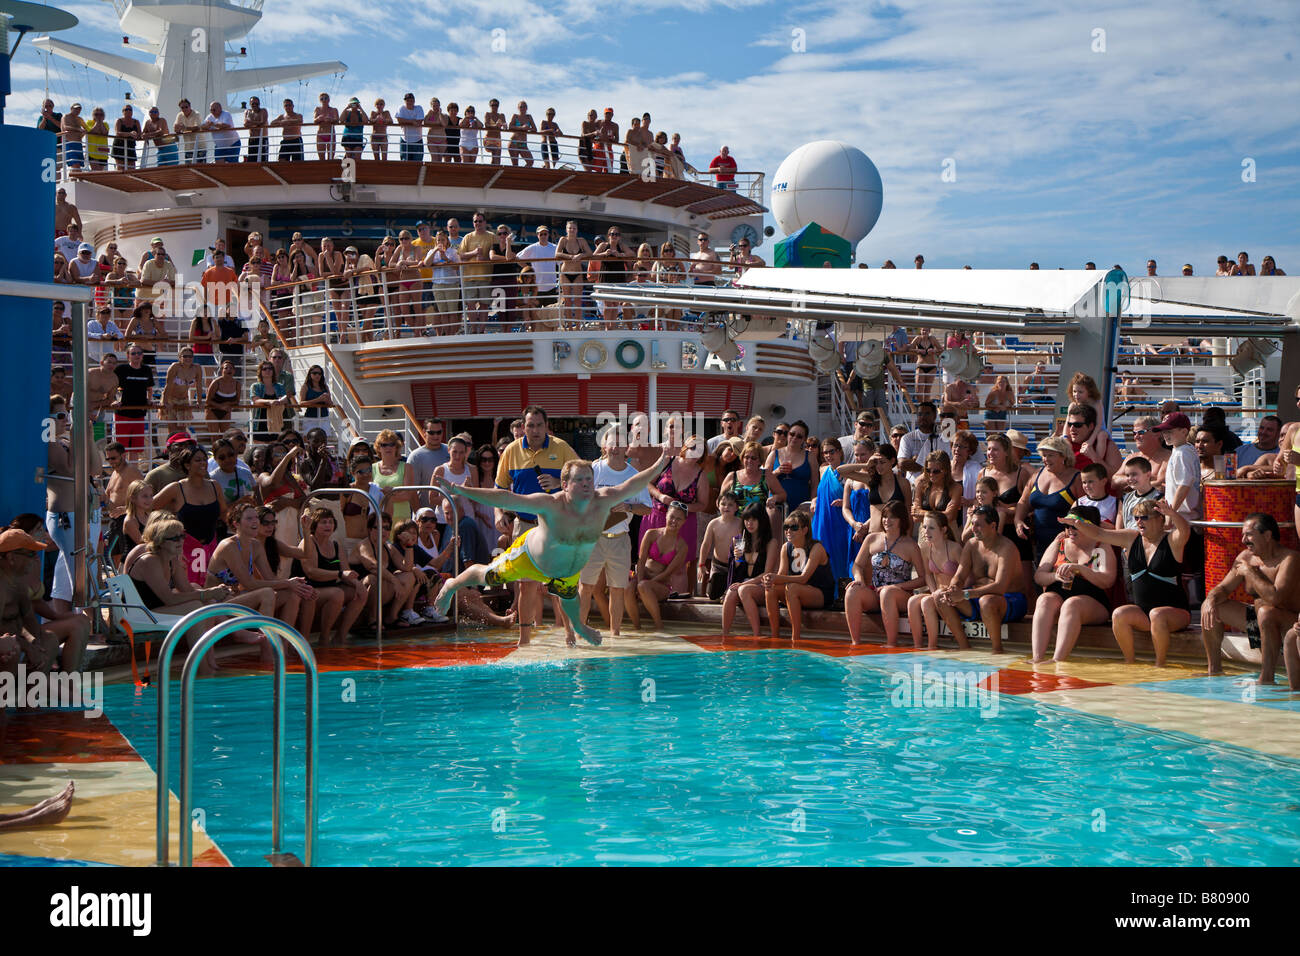 Belly flop contest on the deck of Royal Caribbean Navigator of the Seas cruise ship Stock Photo